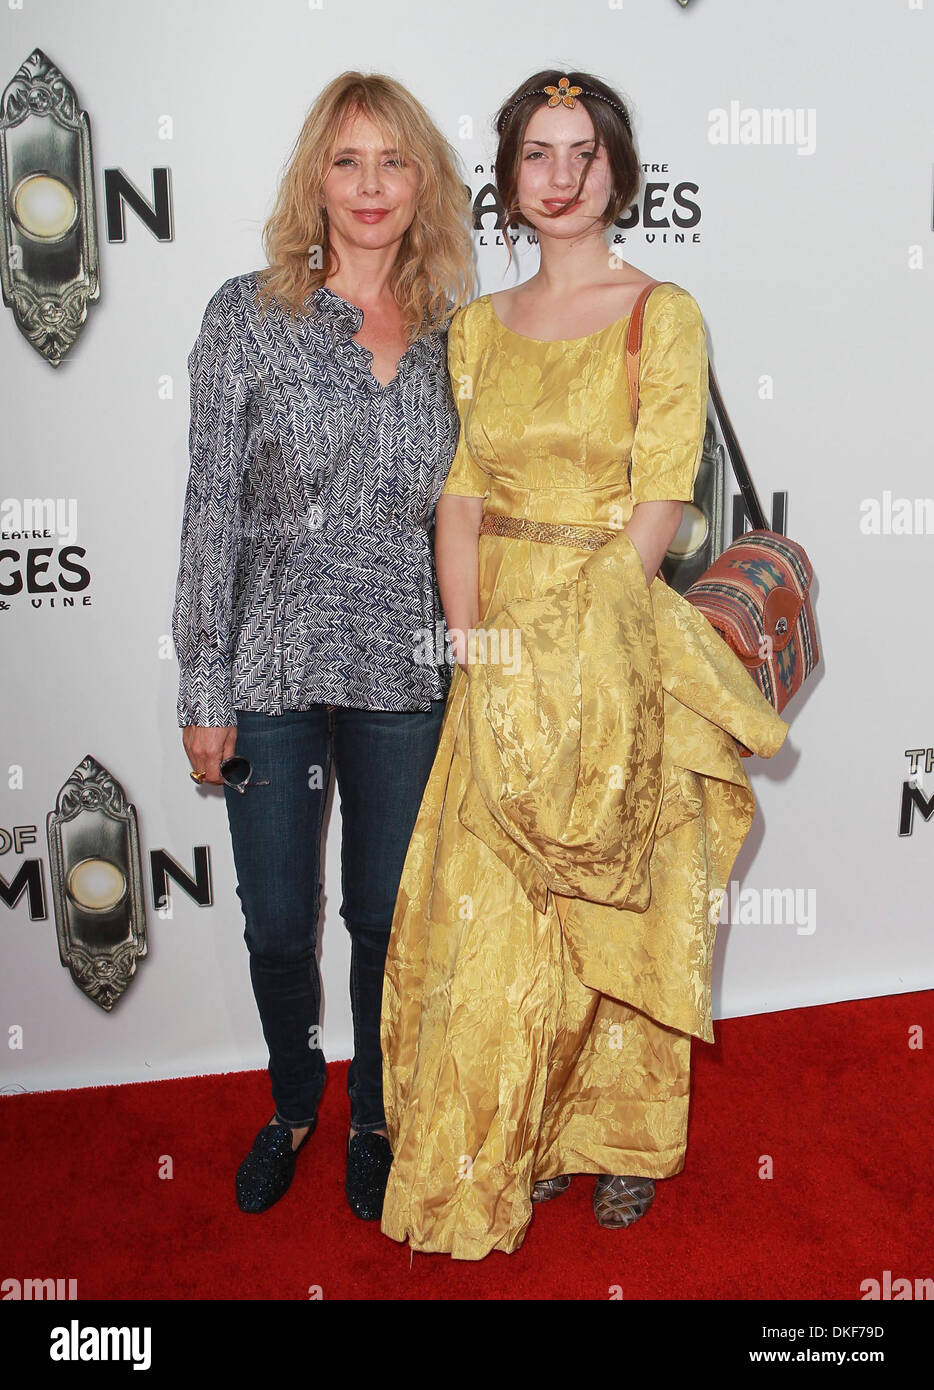 Rosanna Arquette and daughter Zoe Bleu Sidel 'The Book of Mormon' Opening night held at Pantages Theatre - Arrivals Hollywood Stock Photo